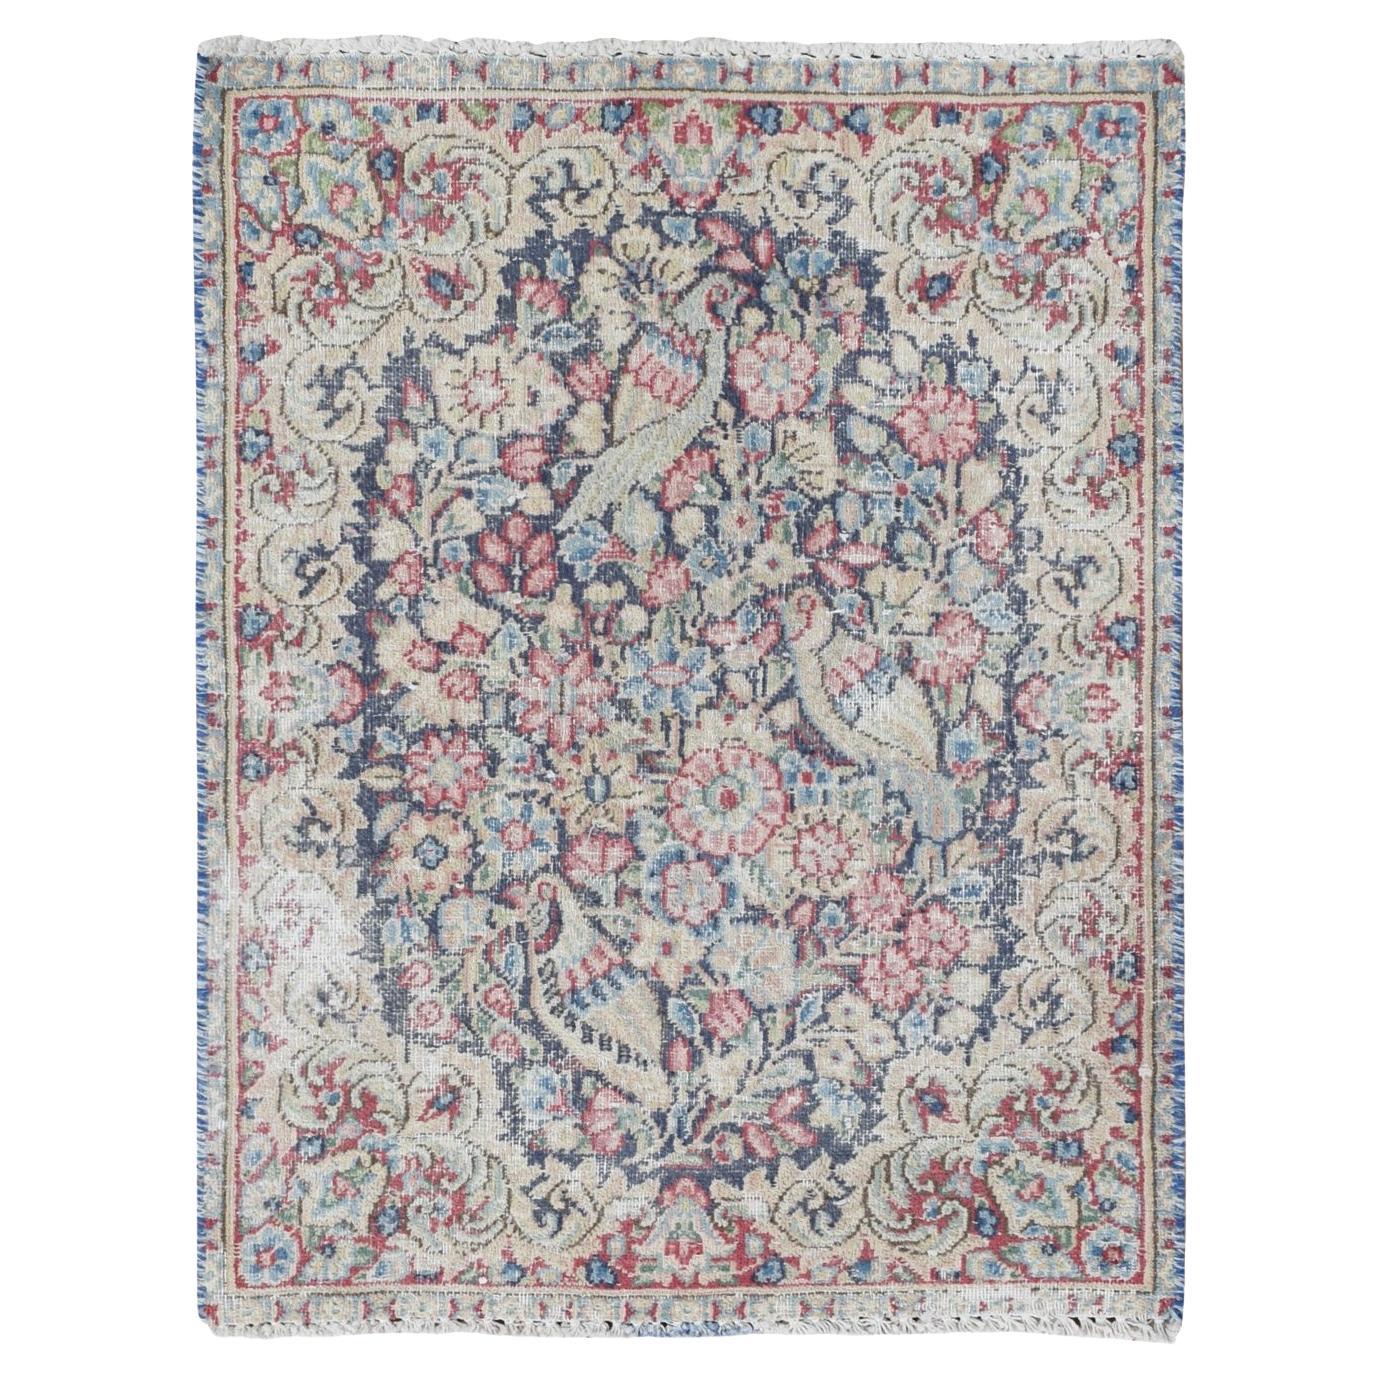 Blue Hand Knotted Old Persian Kerman Birds and Flowers Design Wool Rug 1'8"x2'2"